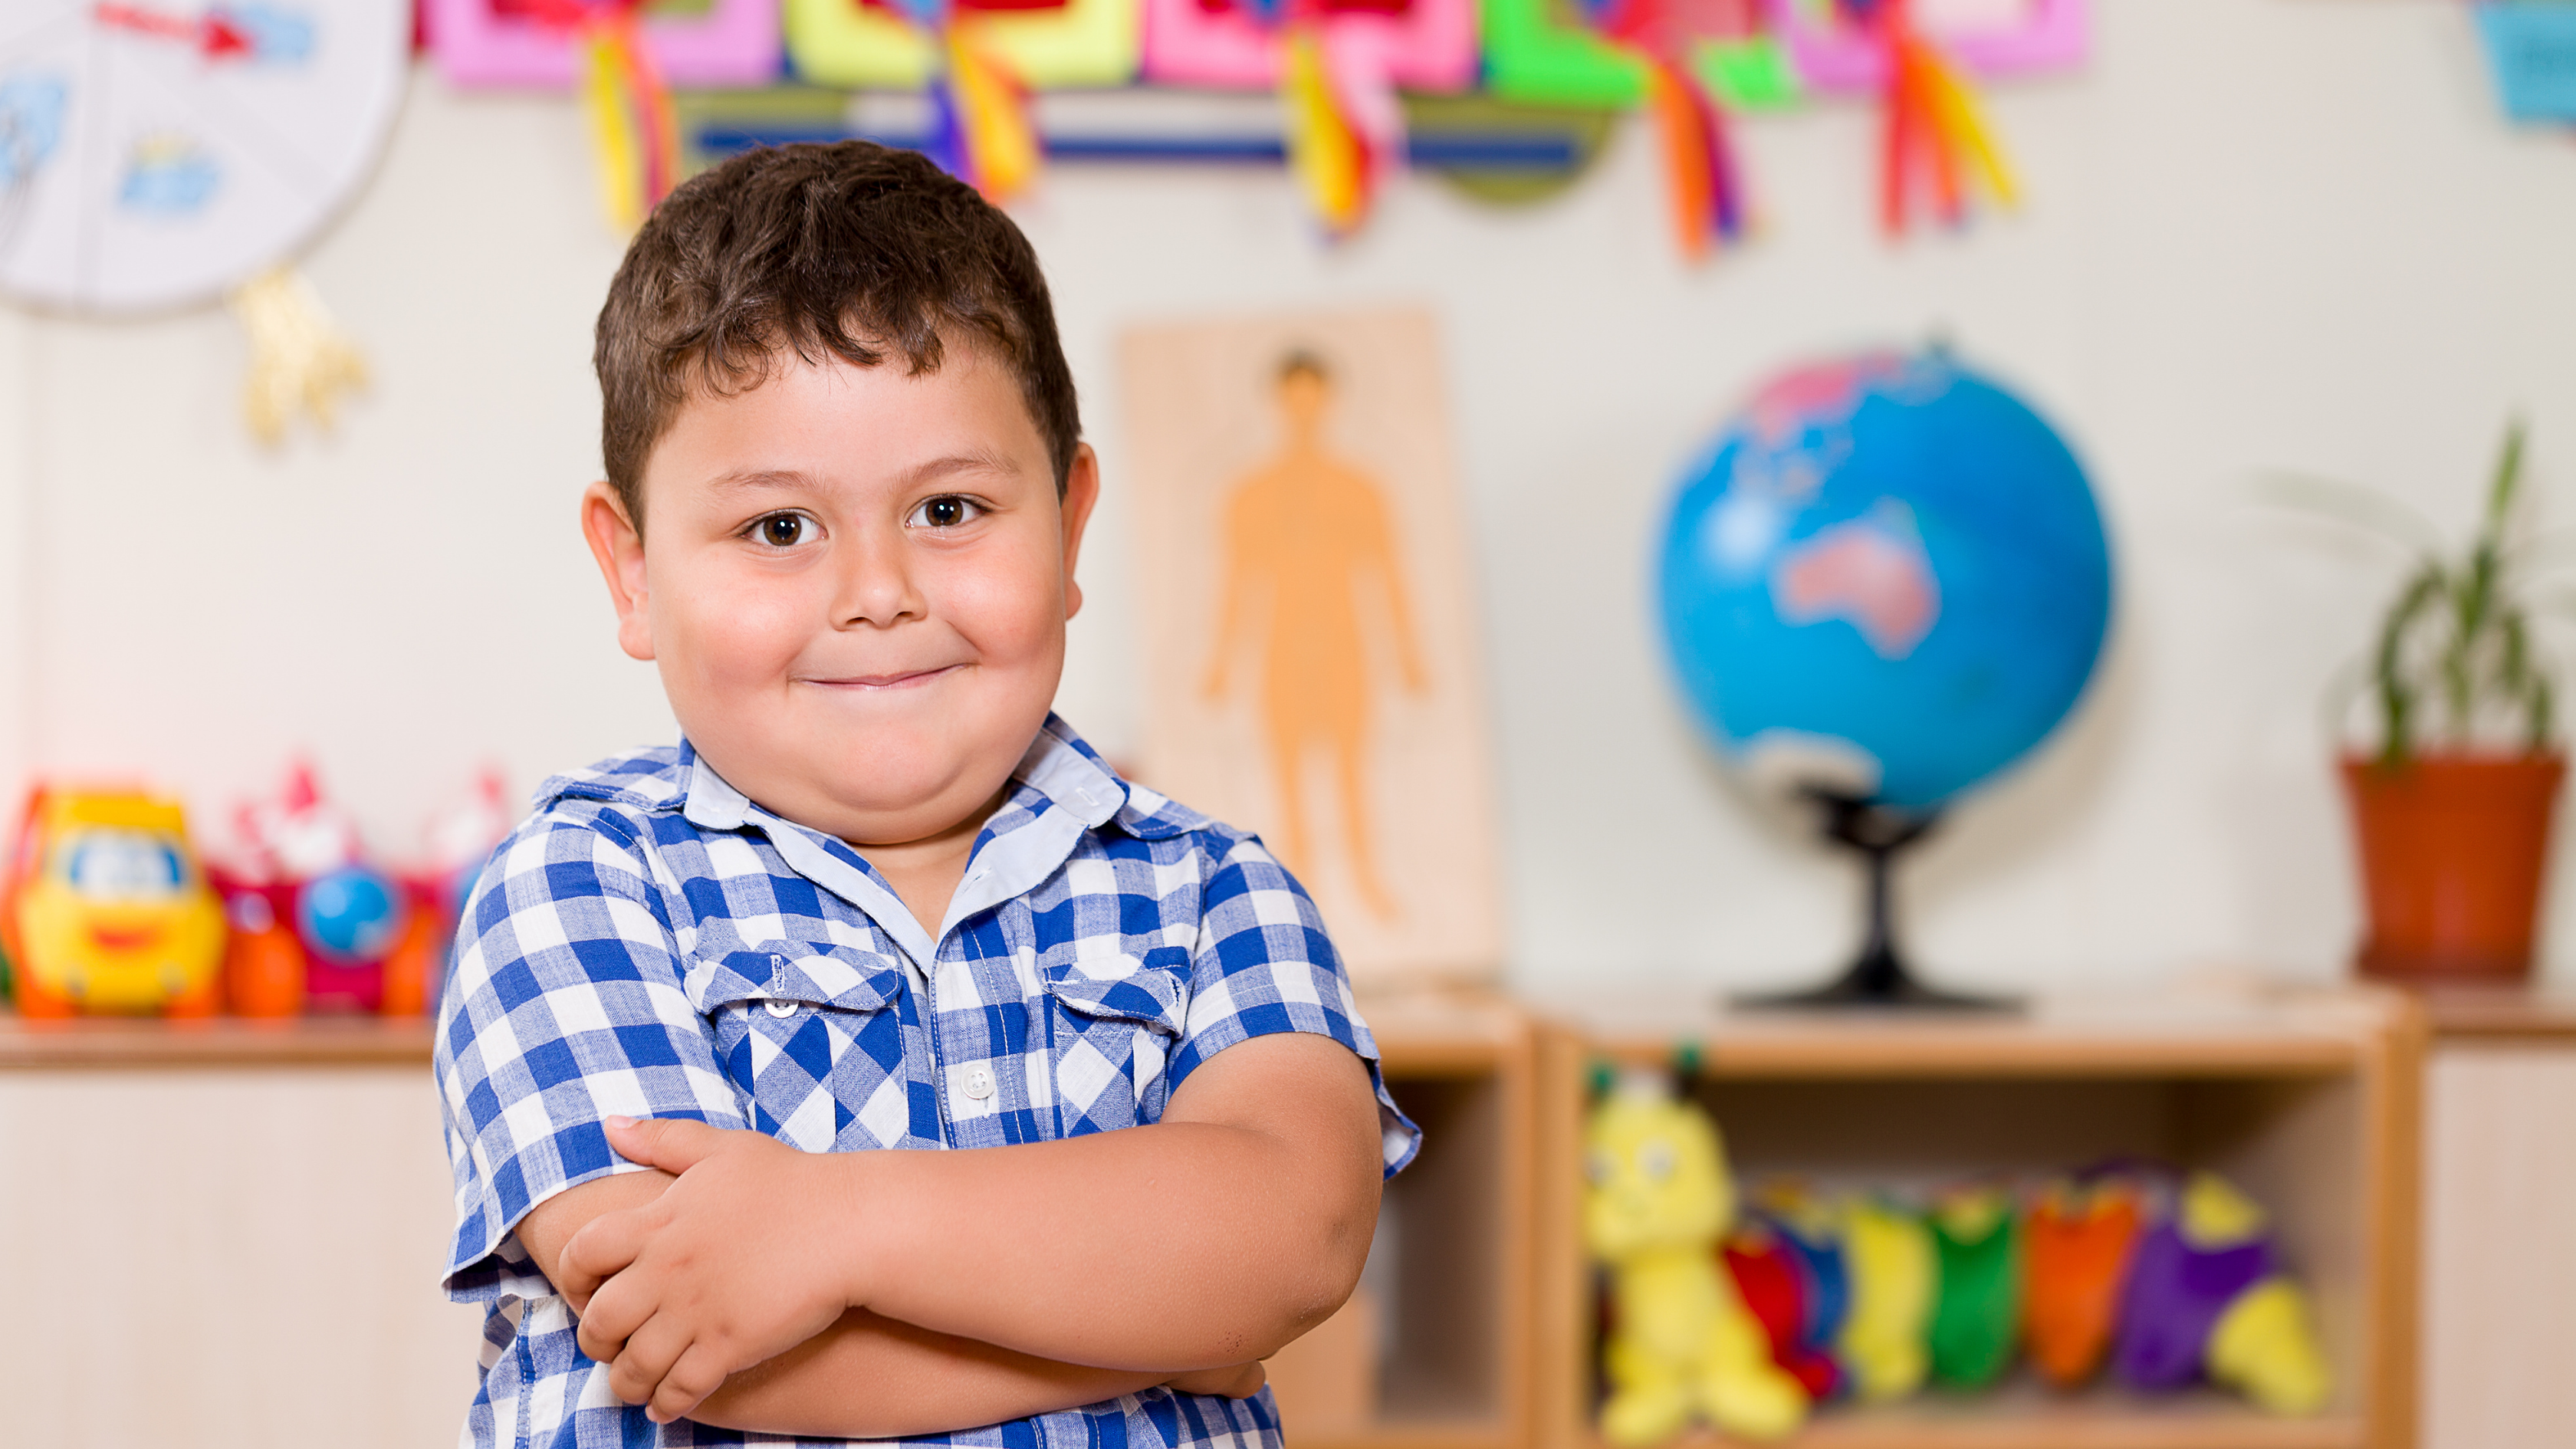 boy with plaid shirt in learning room